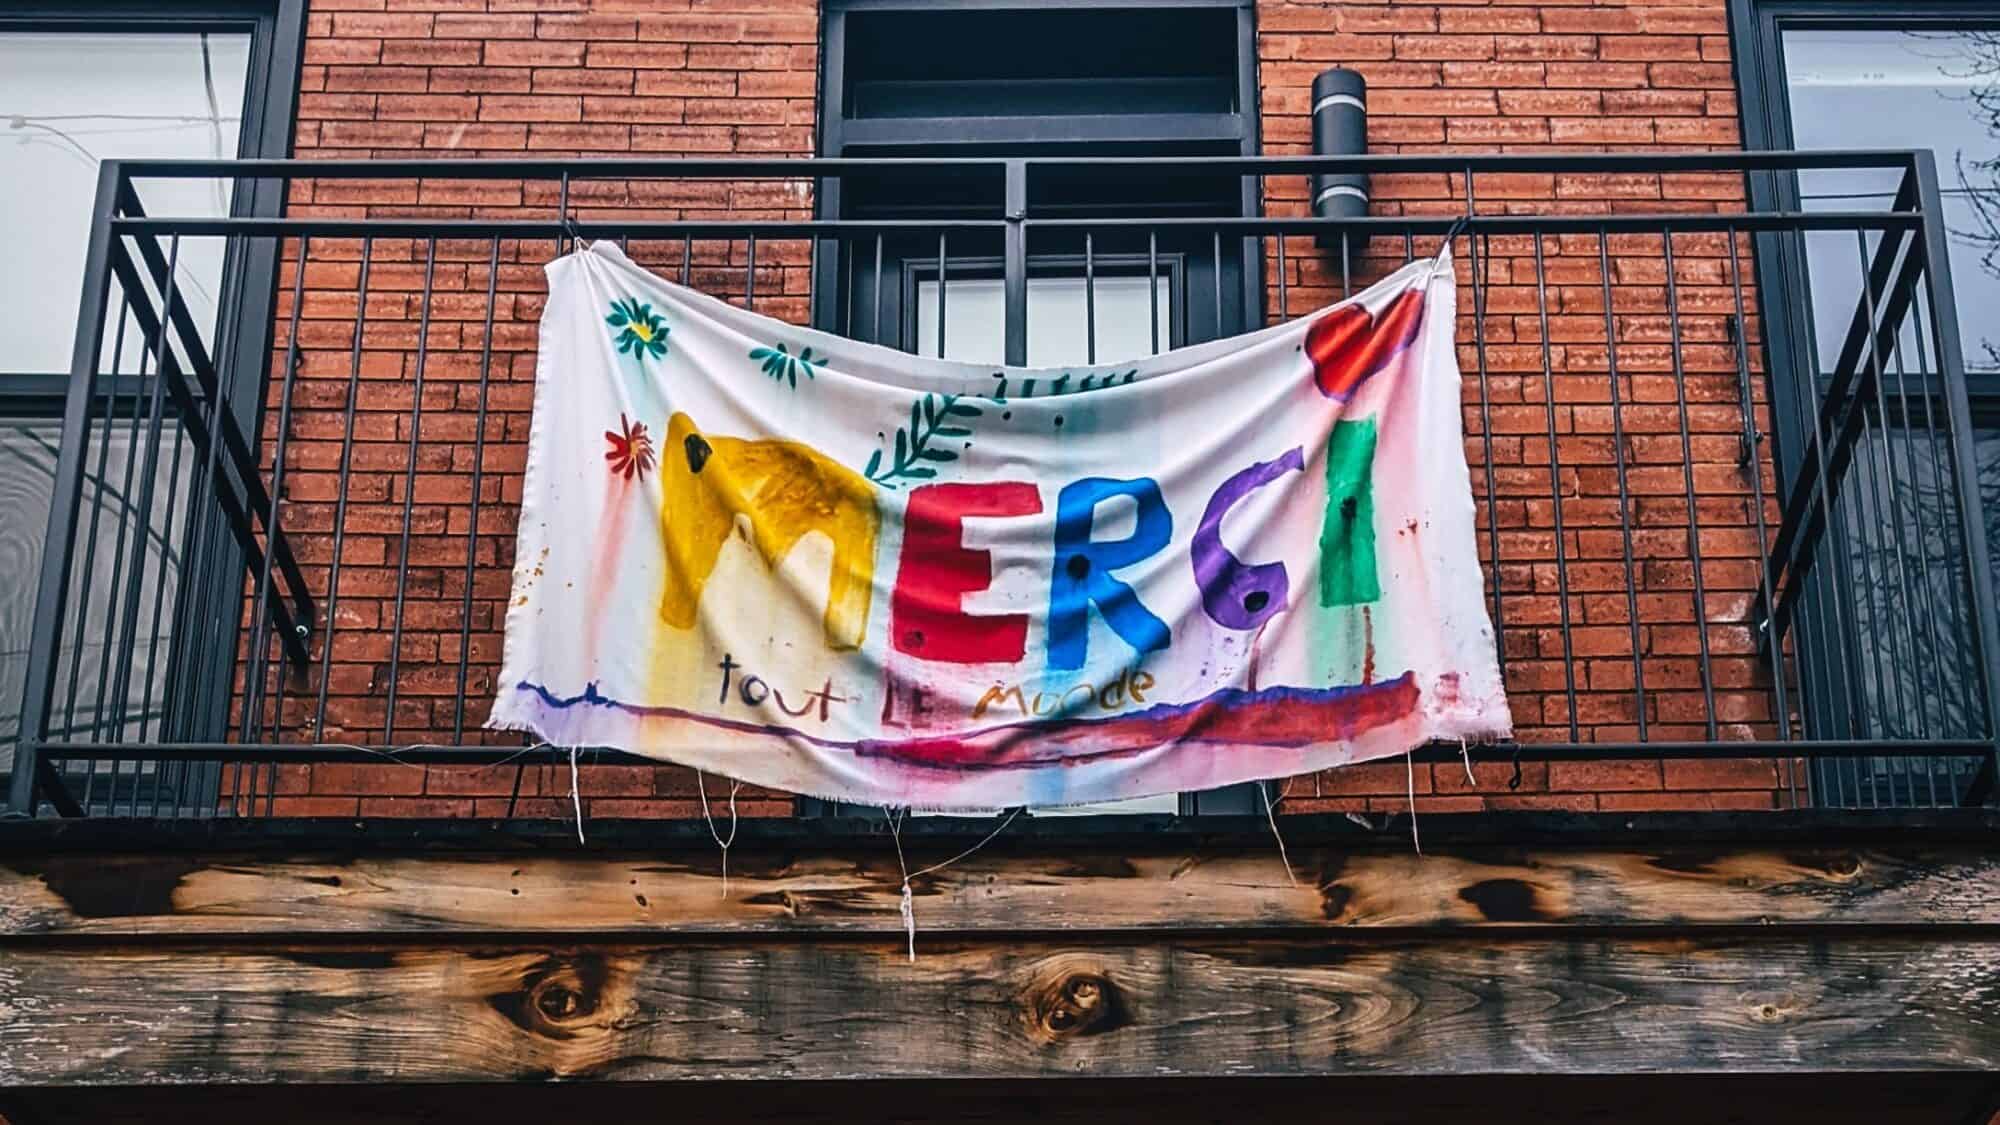 Flag on Montreal home hand painted to say "Merci tout le monde" during early days of the COVID-19 pandemic.